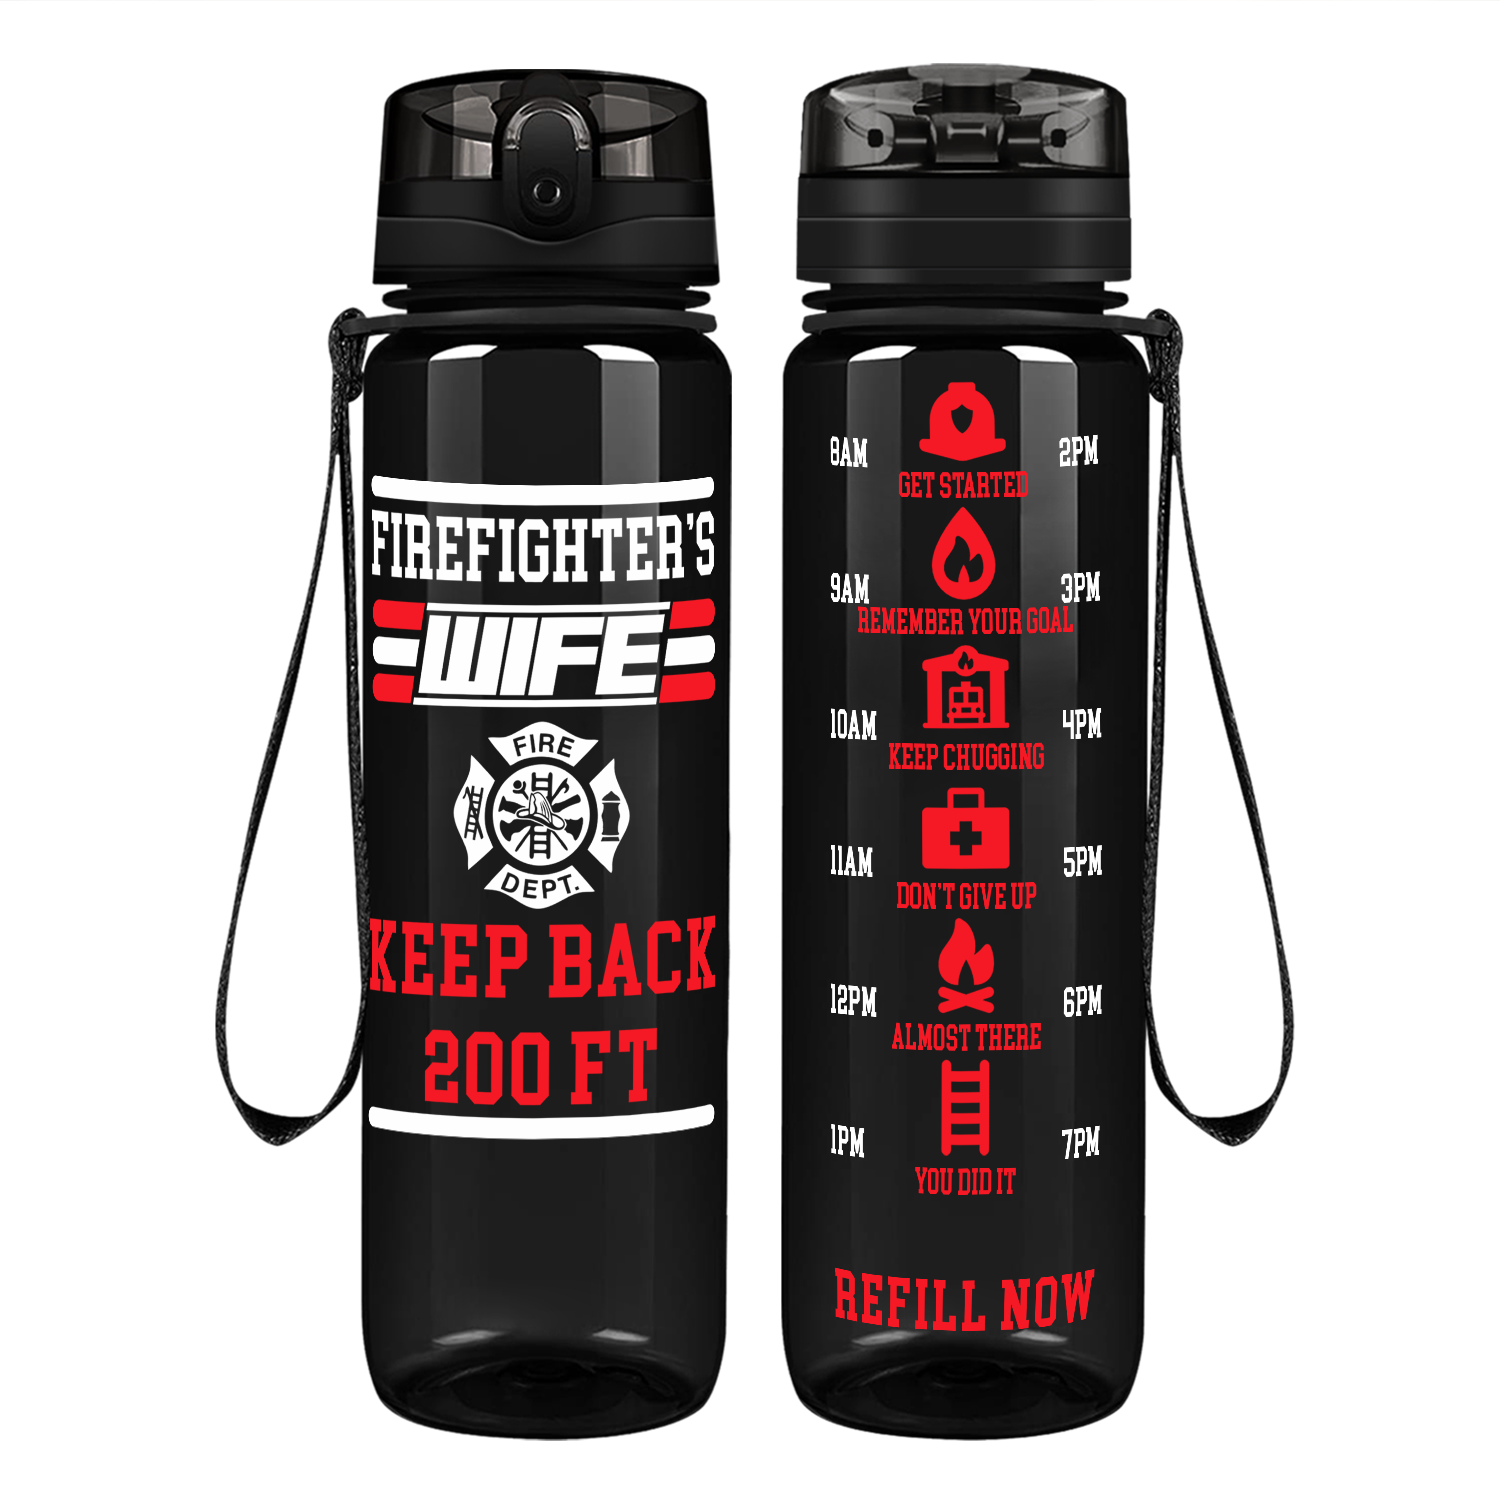 Firefighter's Wife Keep Back 200 FT on 32 oz Motivational Tracking Water Bottle